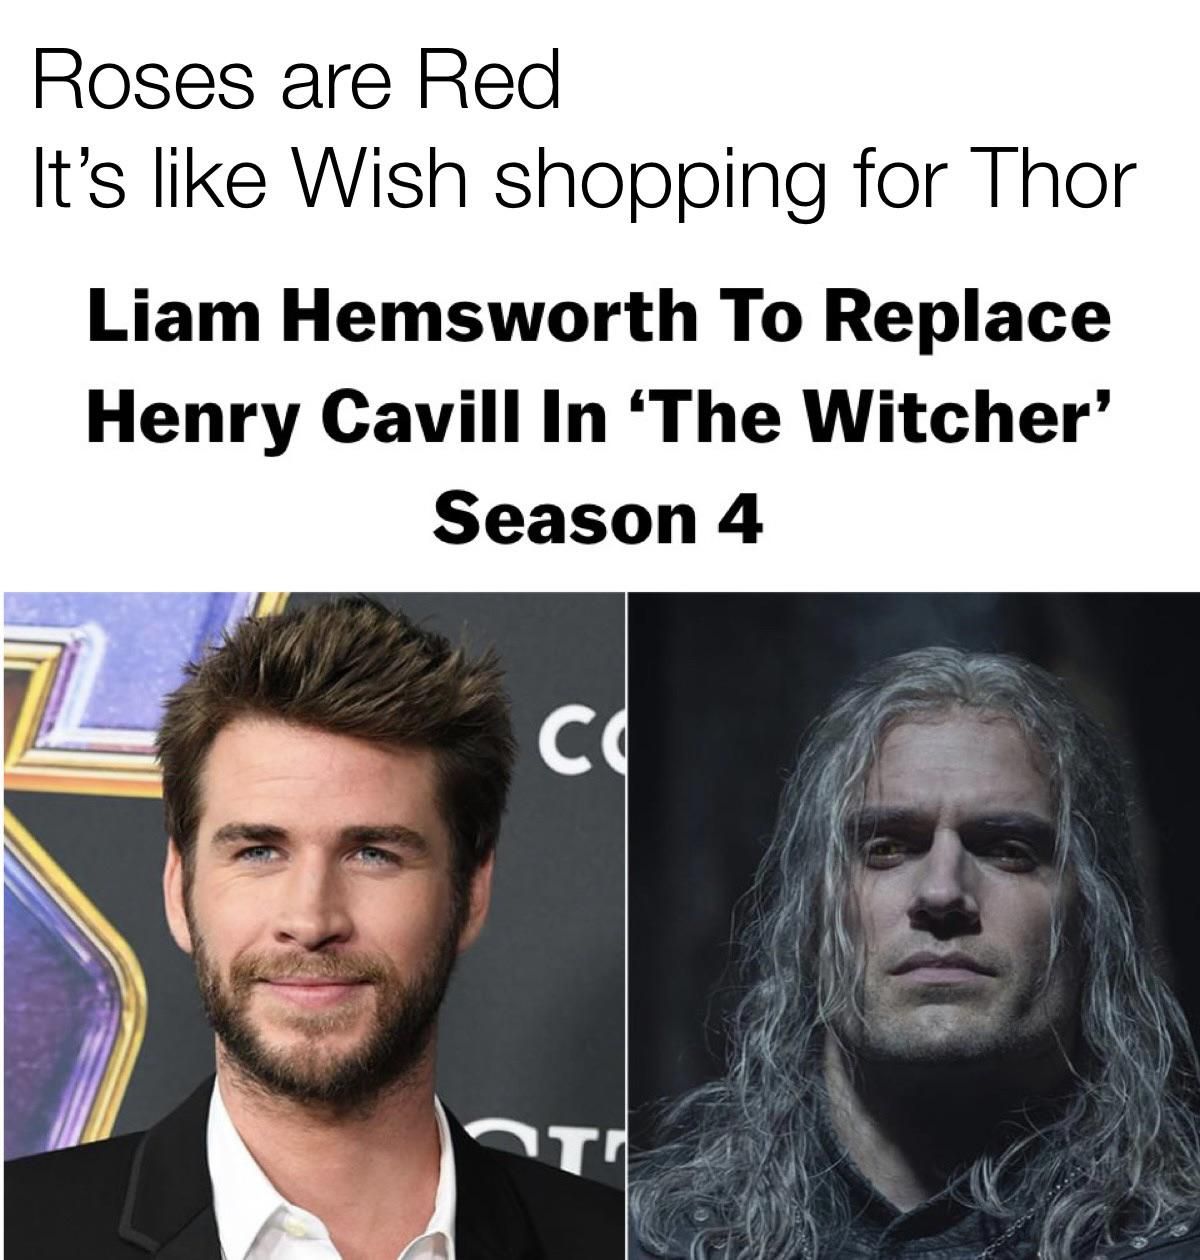 Thorry but it’th true